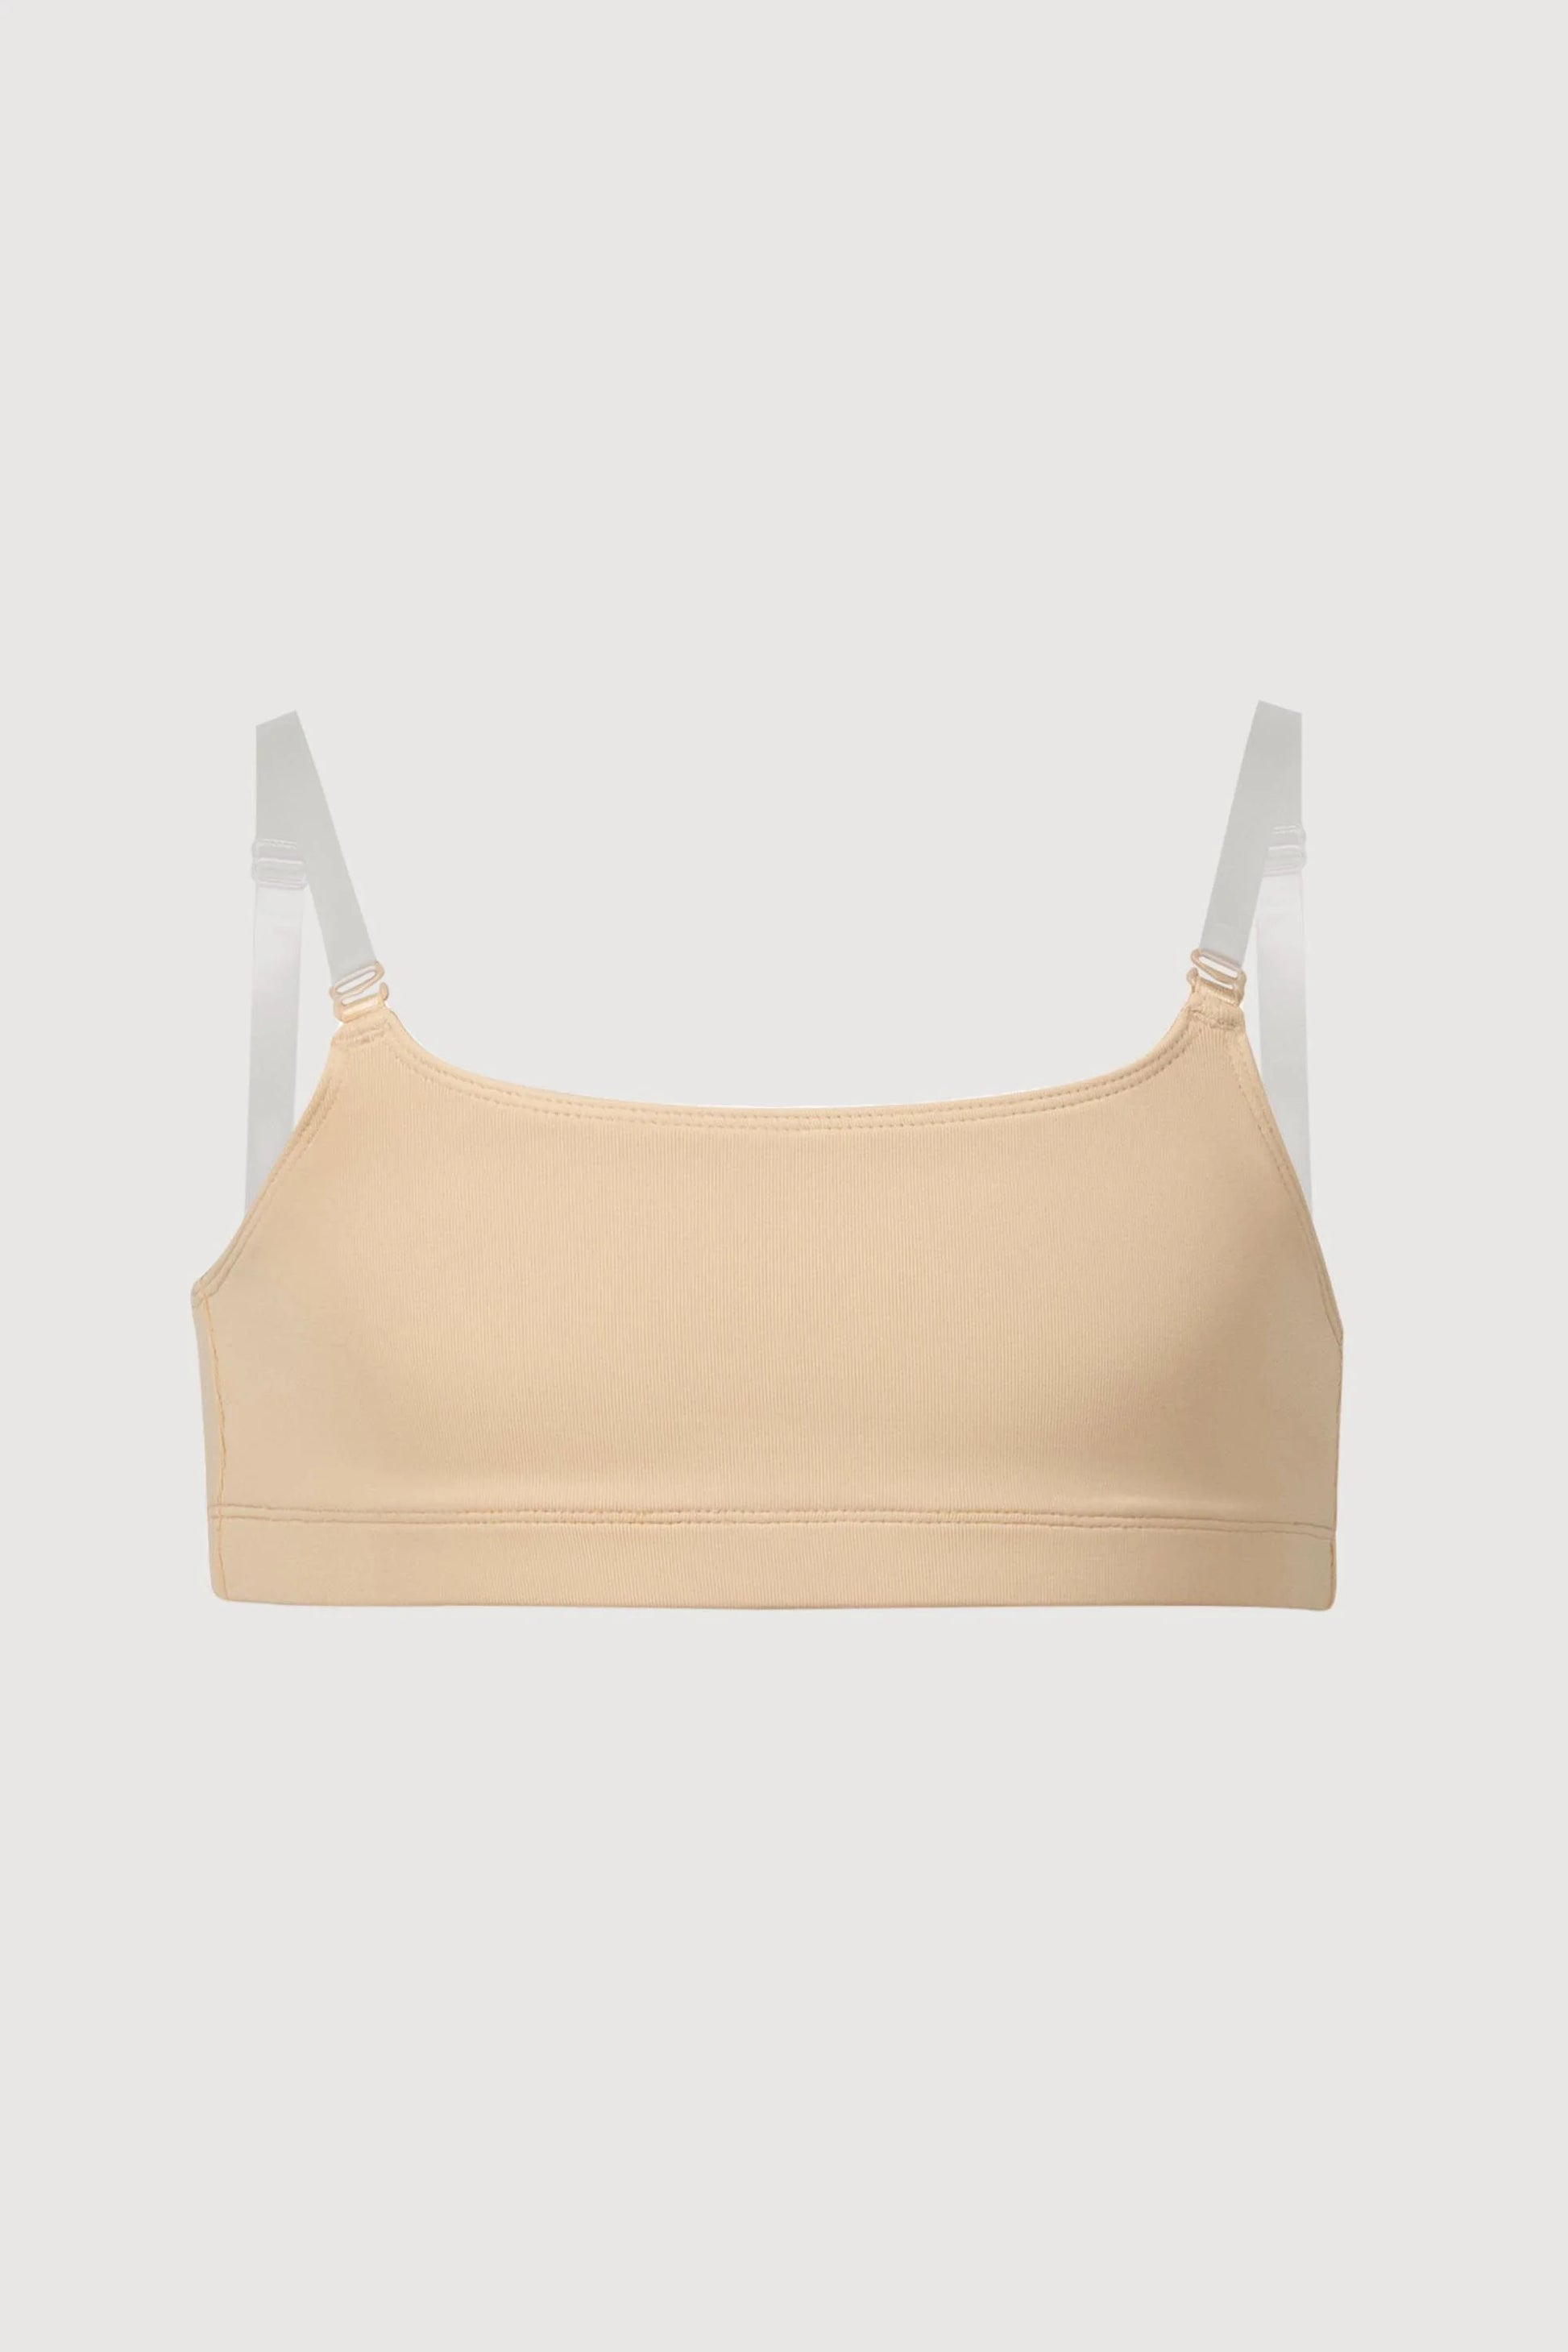 Kids Nude Bra Top With Clear Straps – On Pointe Dancewear